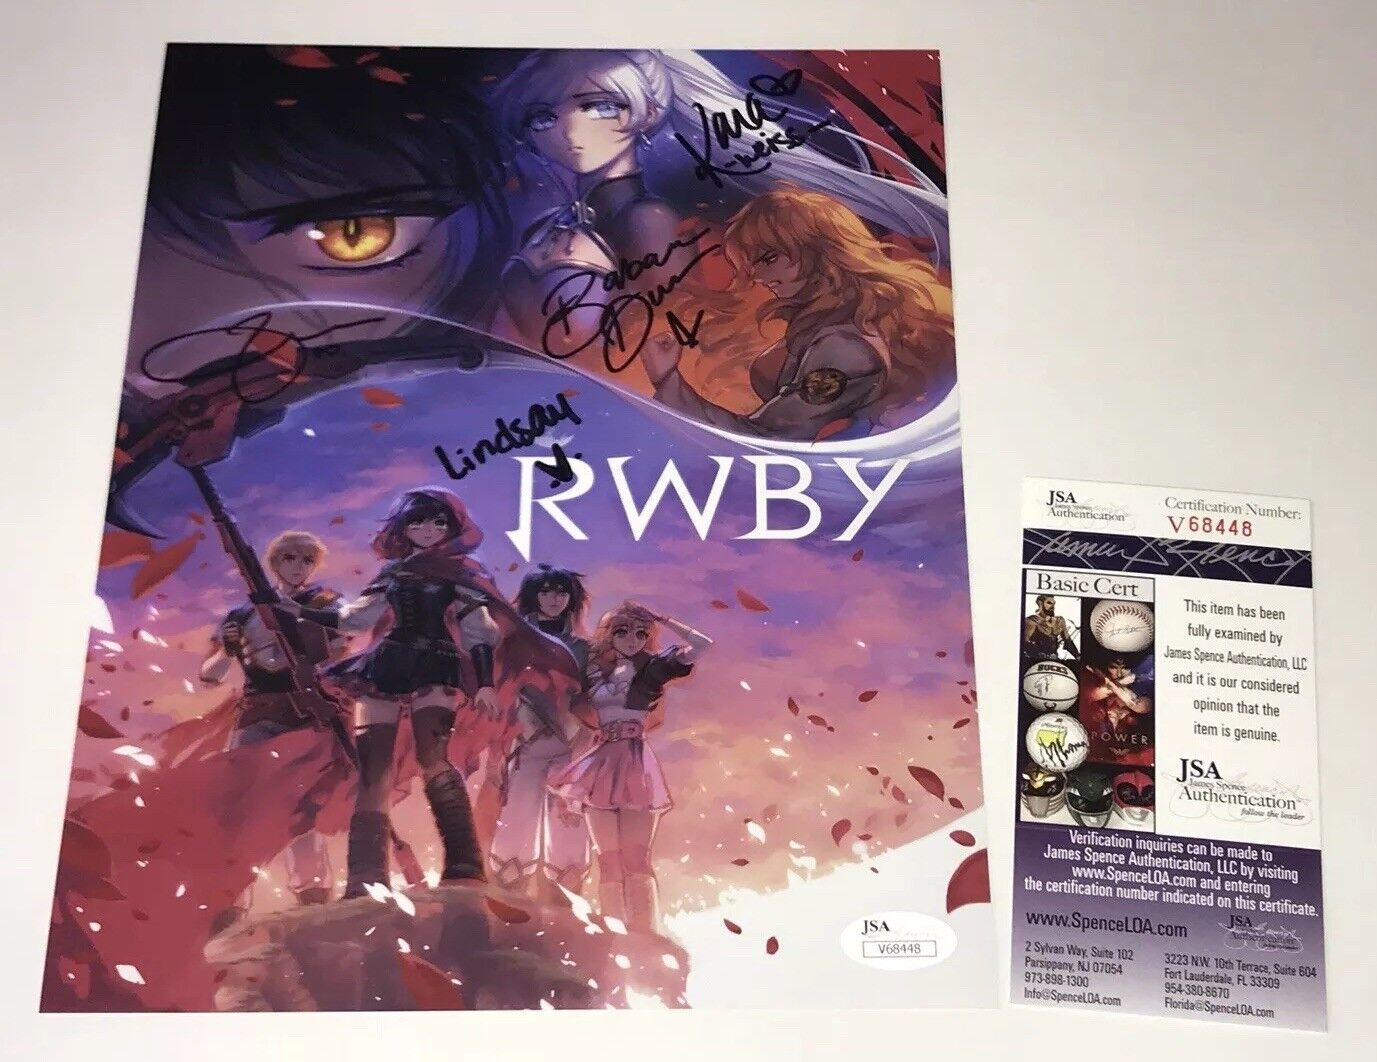 RWBY Cast Signed 8x10 Photo Poster painting In Person Autograph ROOSTER TEETH JSA COA